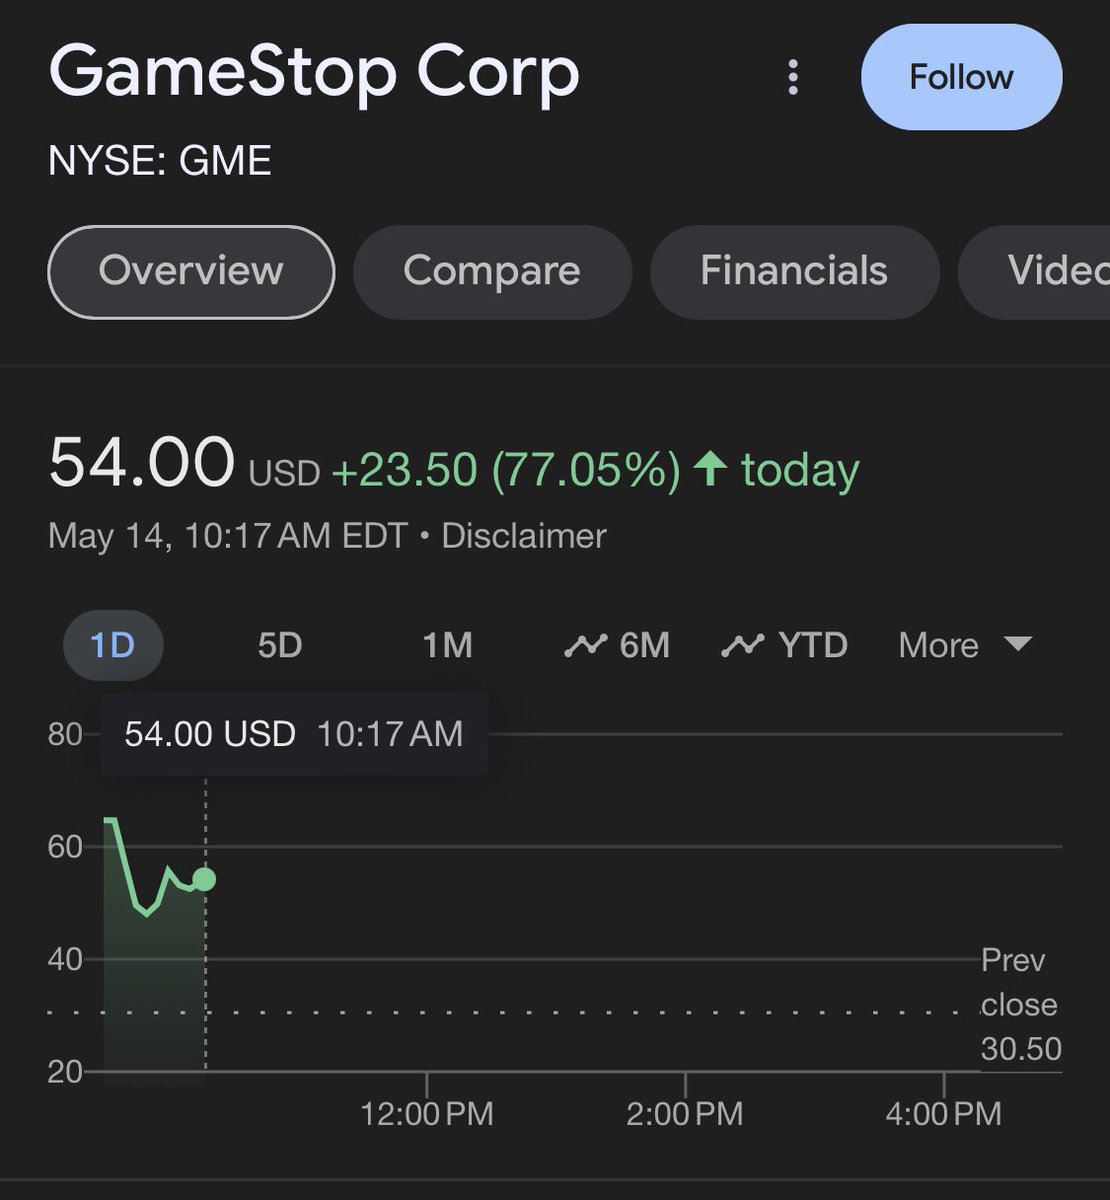 GameStop $GME has been halted 5 times in the last 30 minutes 

Is that a free market?